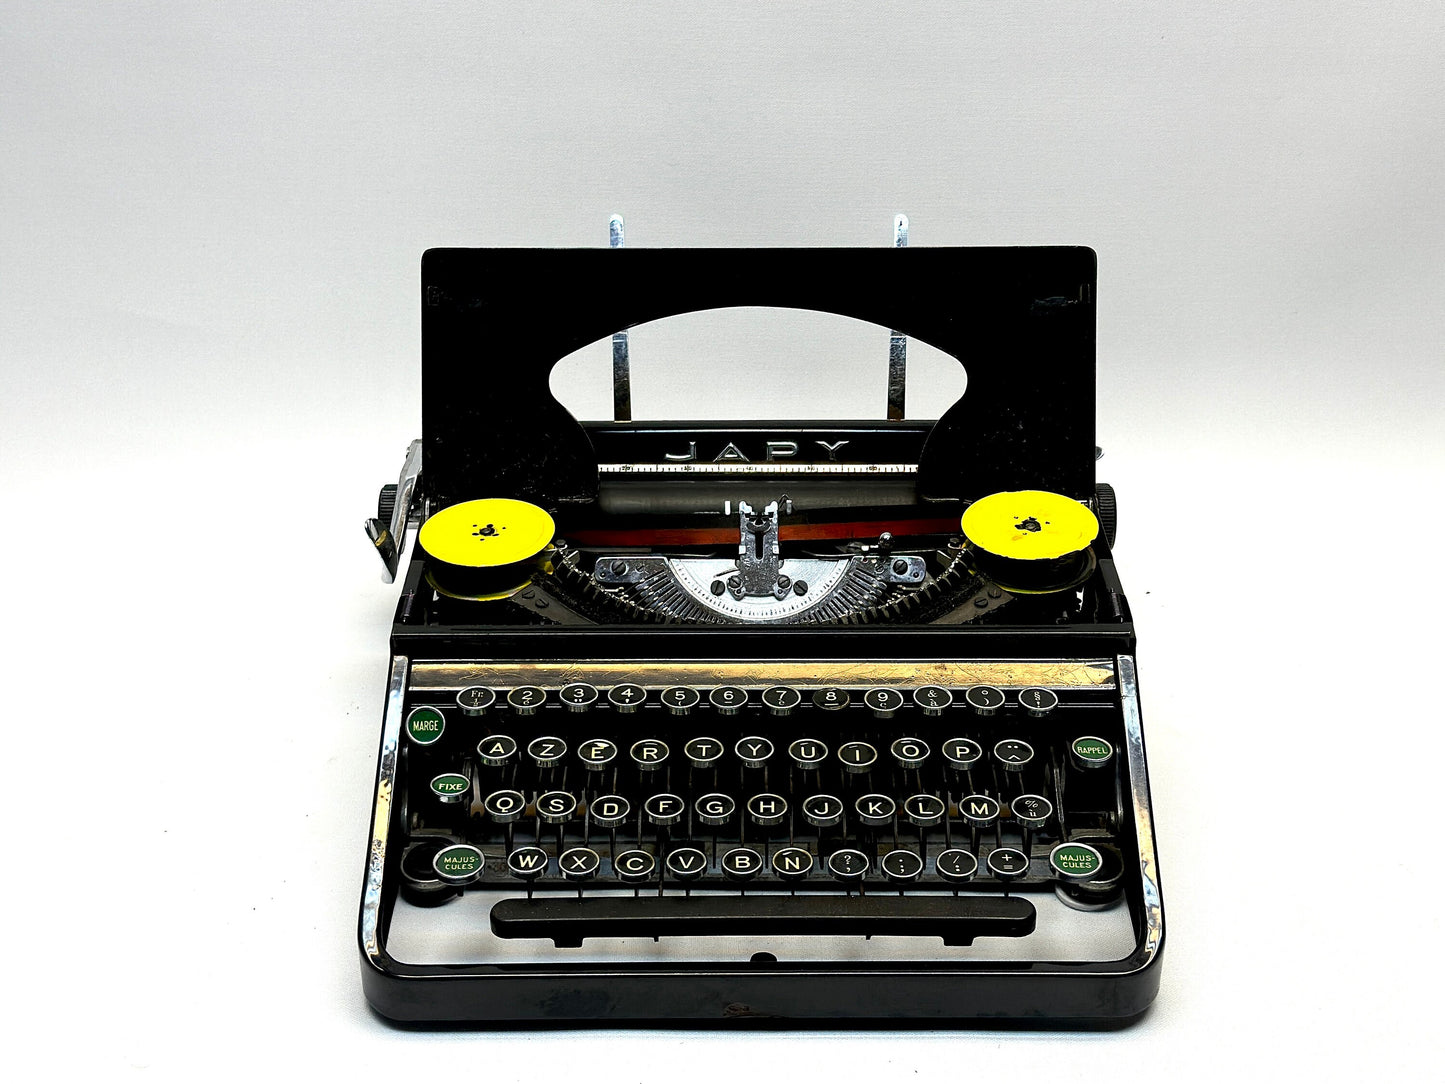 Japy Typewriter - Classic Black Model from 1940 with AZERTY Glass Keyboard